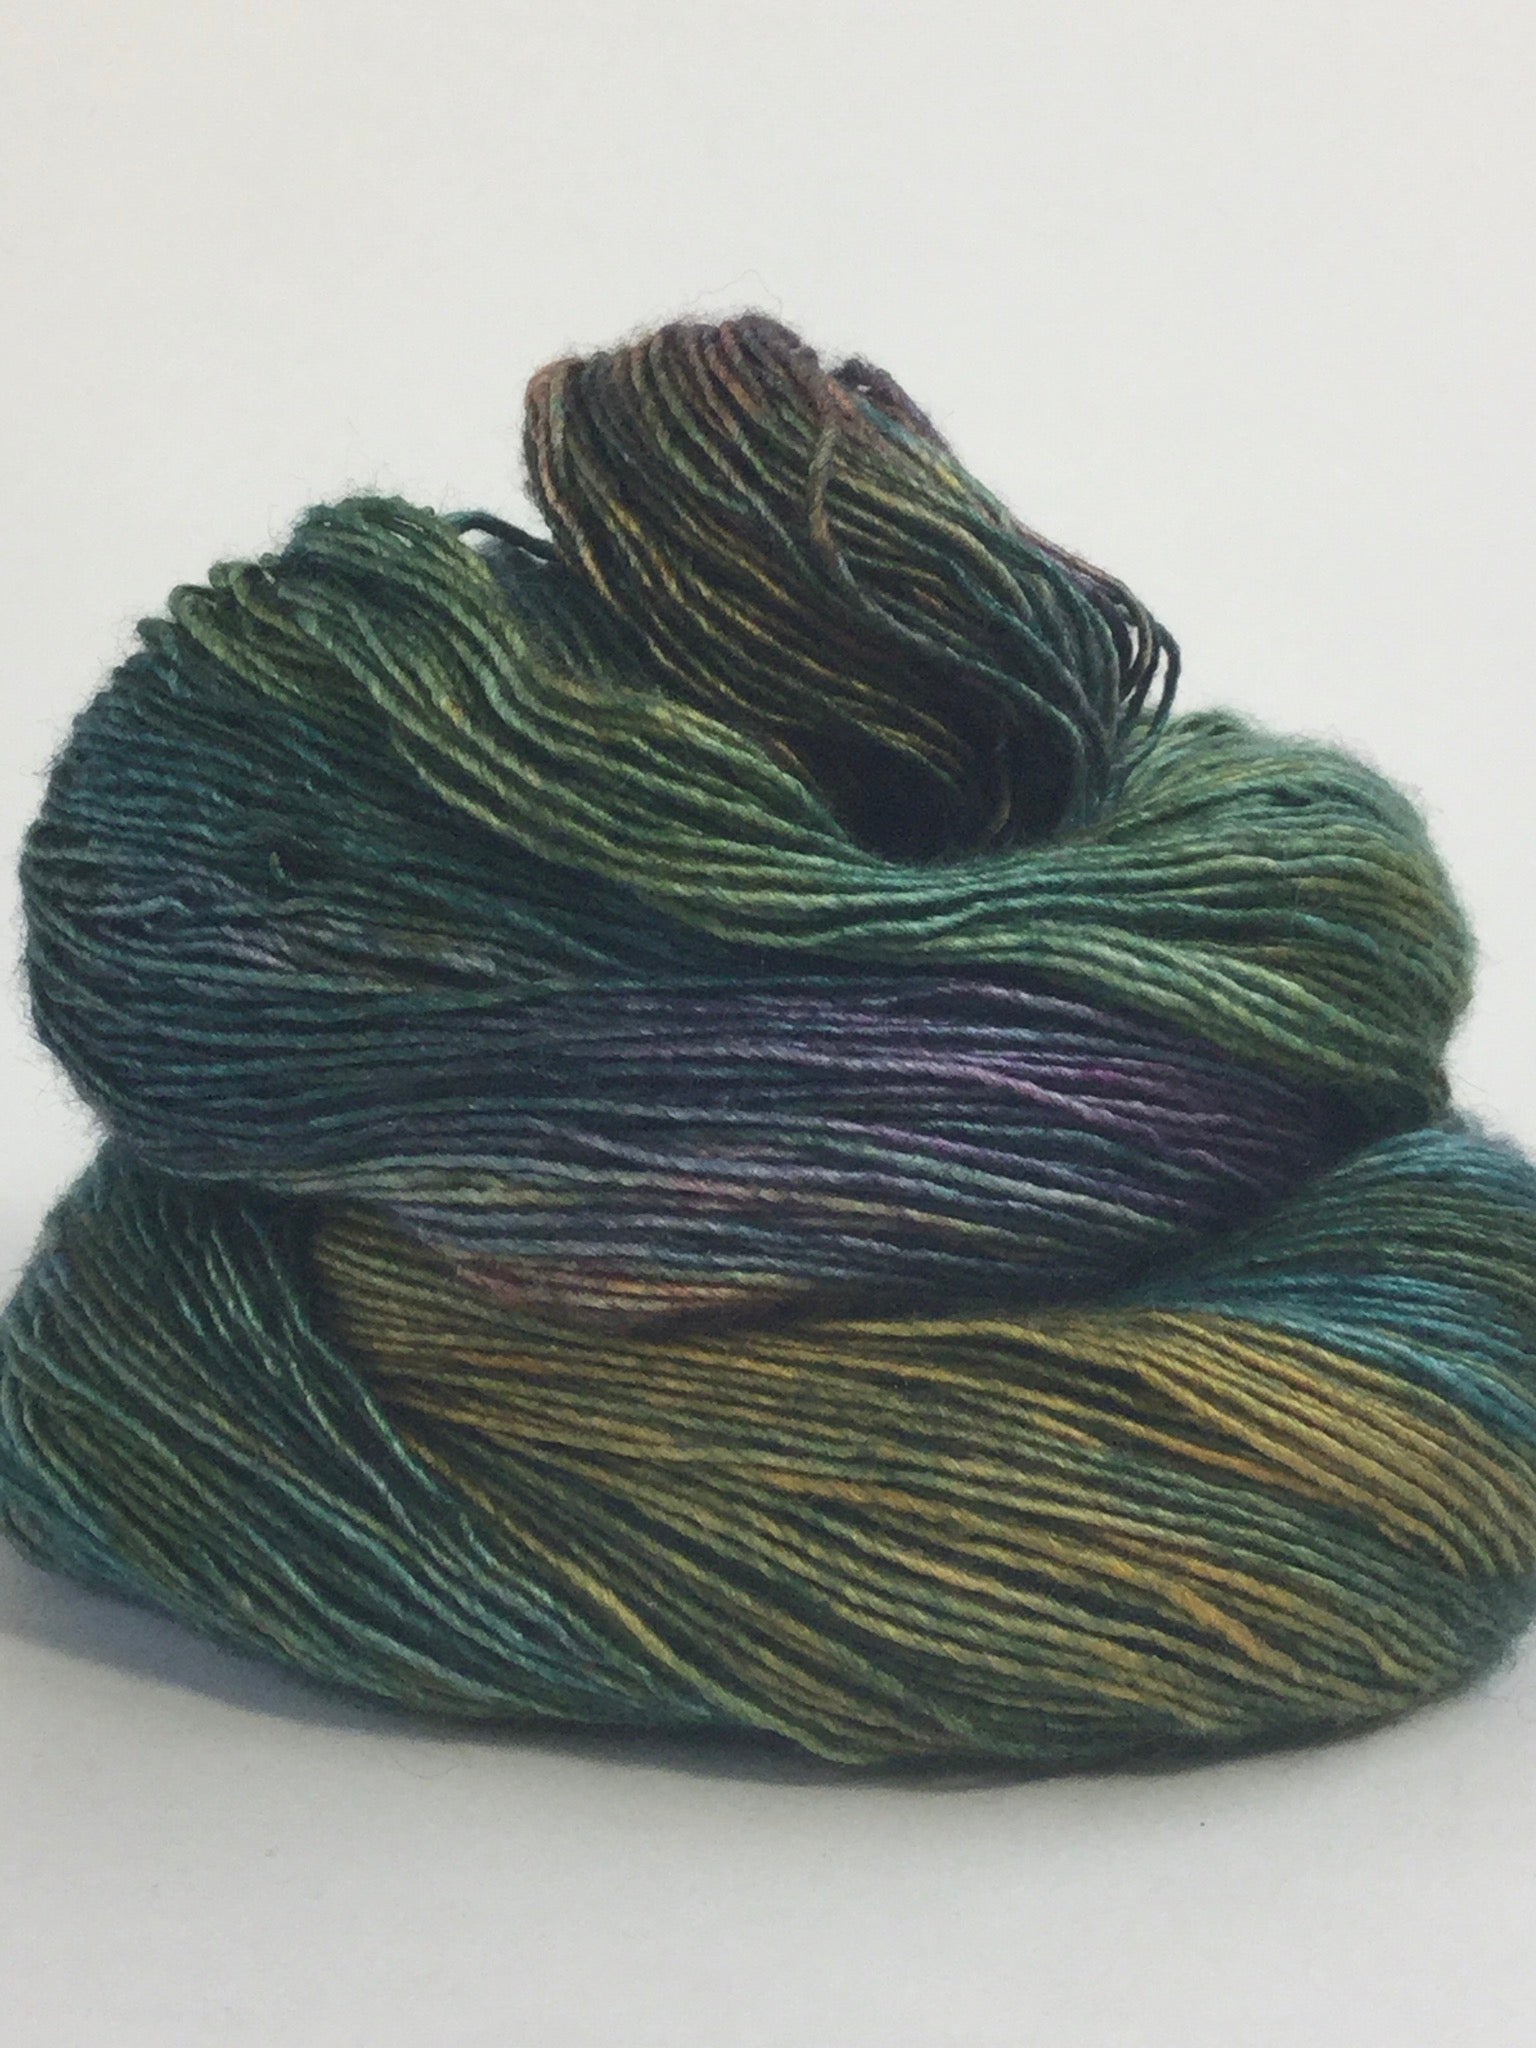 Knitopia - River Silk and Merino from Tributary Yarns